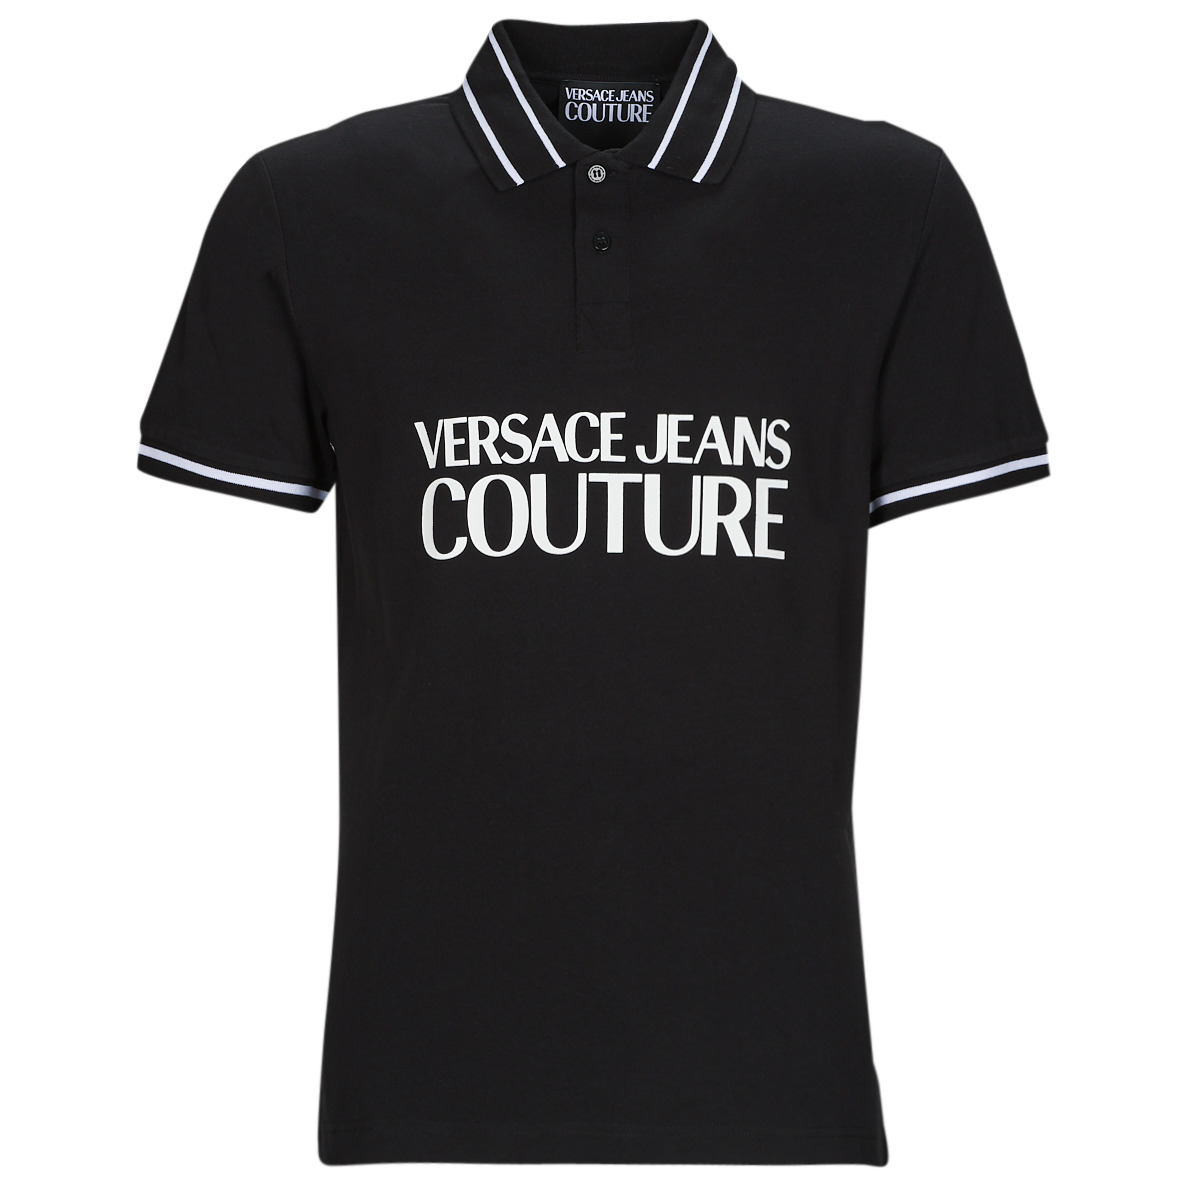 Versace Jeans Couture  Πόλο με κοντά μανίκια Versace Jeans Couture GAGT03-899